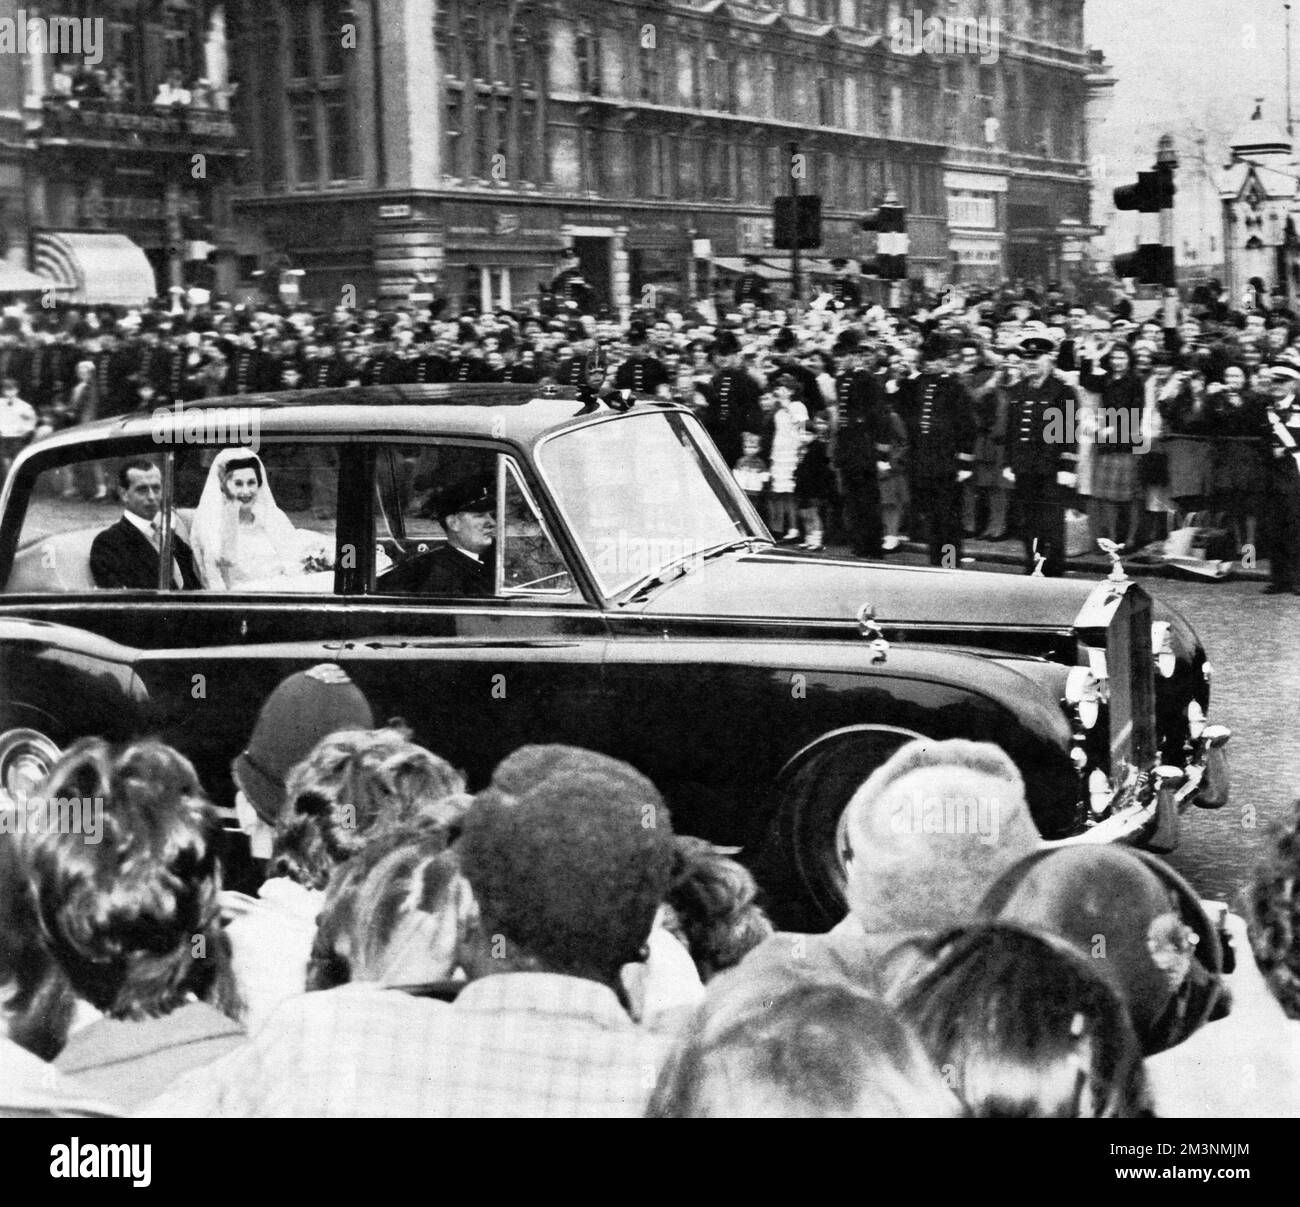 Princess Alexandra of Kent (born 1936), arrives at Westminster Abbey on 24 April 1963 in a smart Rolls Royce for her marriage to the Hon. Angus Ogilvy.  Accompanying her is her elder brother, the Duke of Kent who gave her away.     Date: 1963 Stock Photo